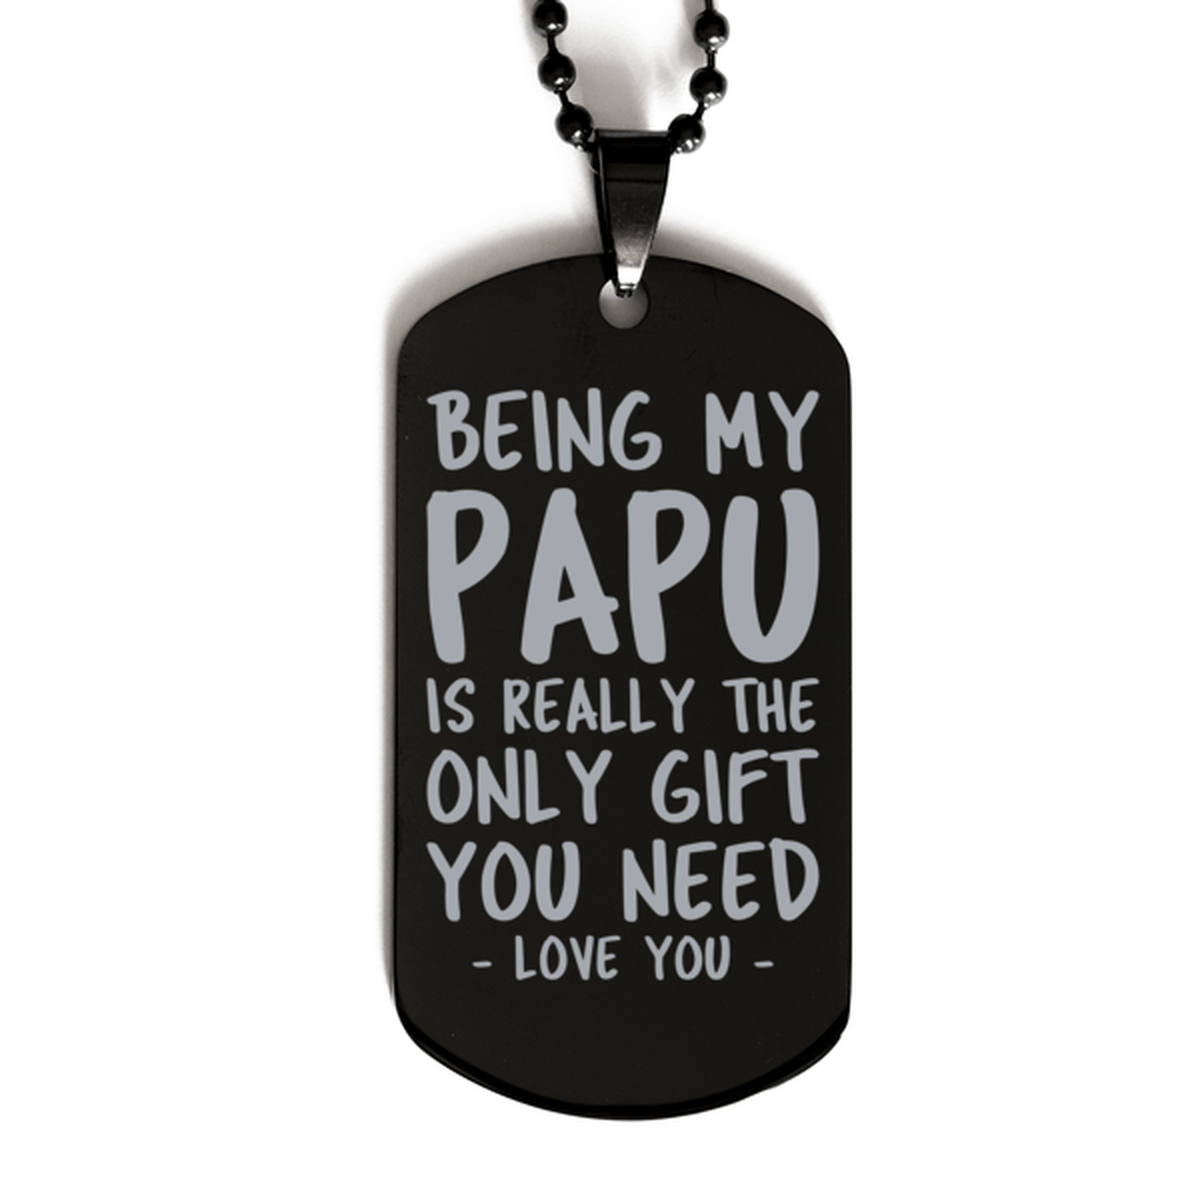 Funny Papu Black Dog Tag Necklace, Being My Papu Is Really the Only Gift You Need, Best Birthday Gifts for Papu